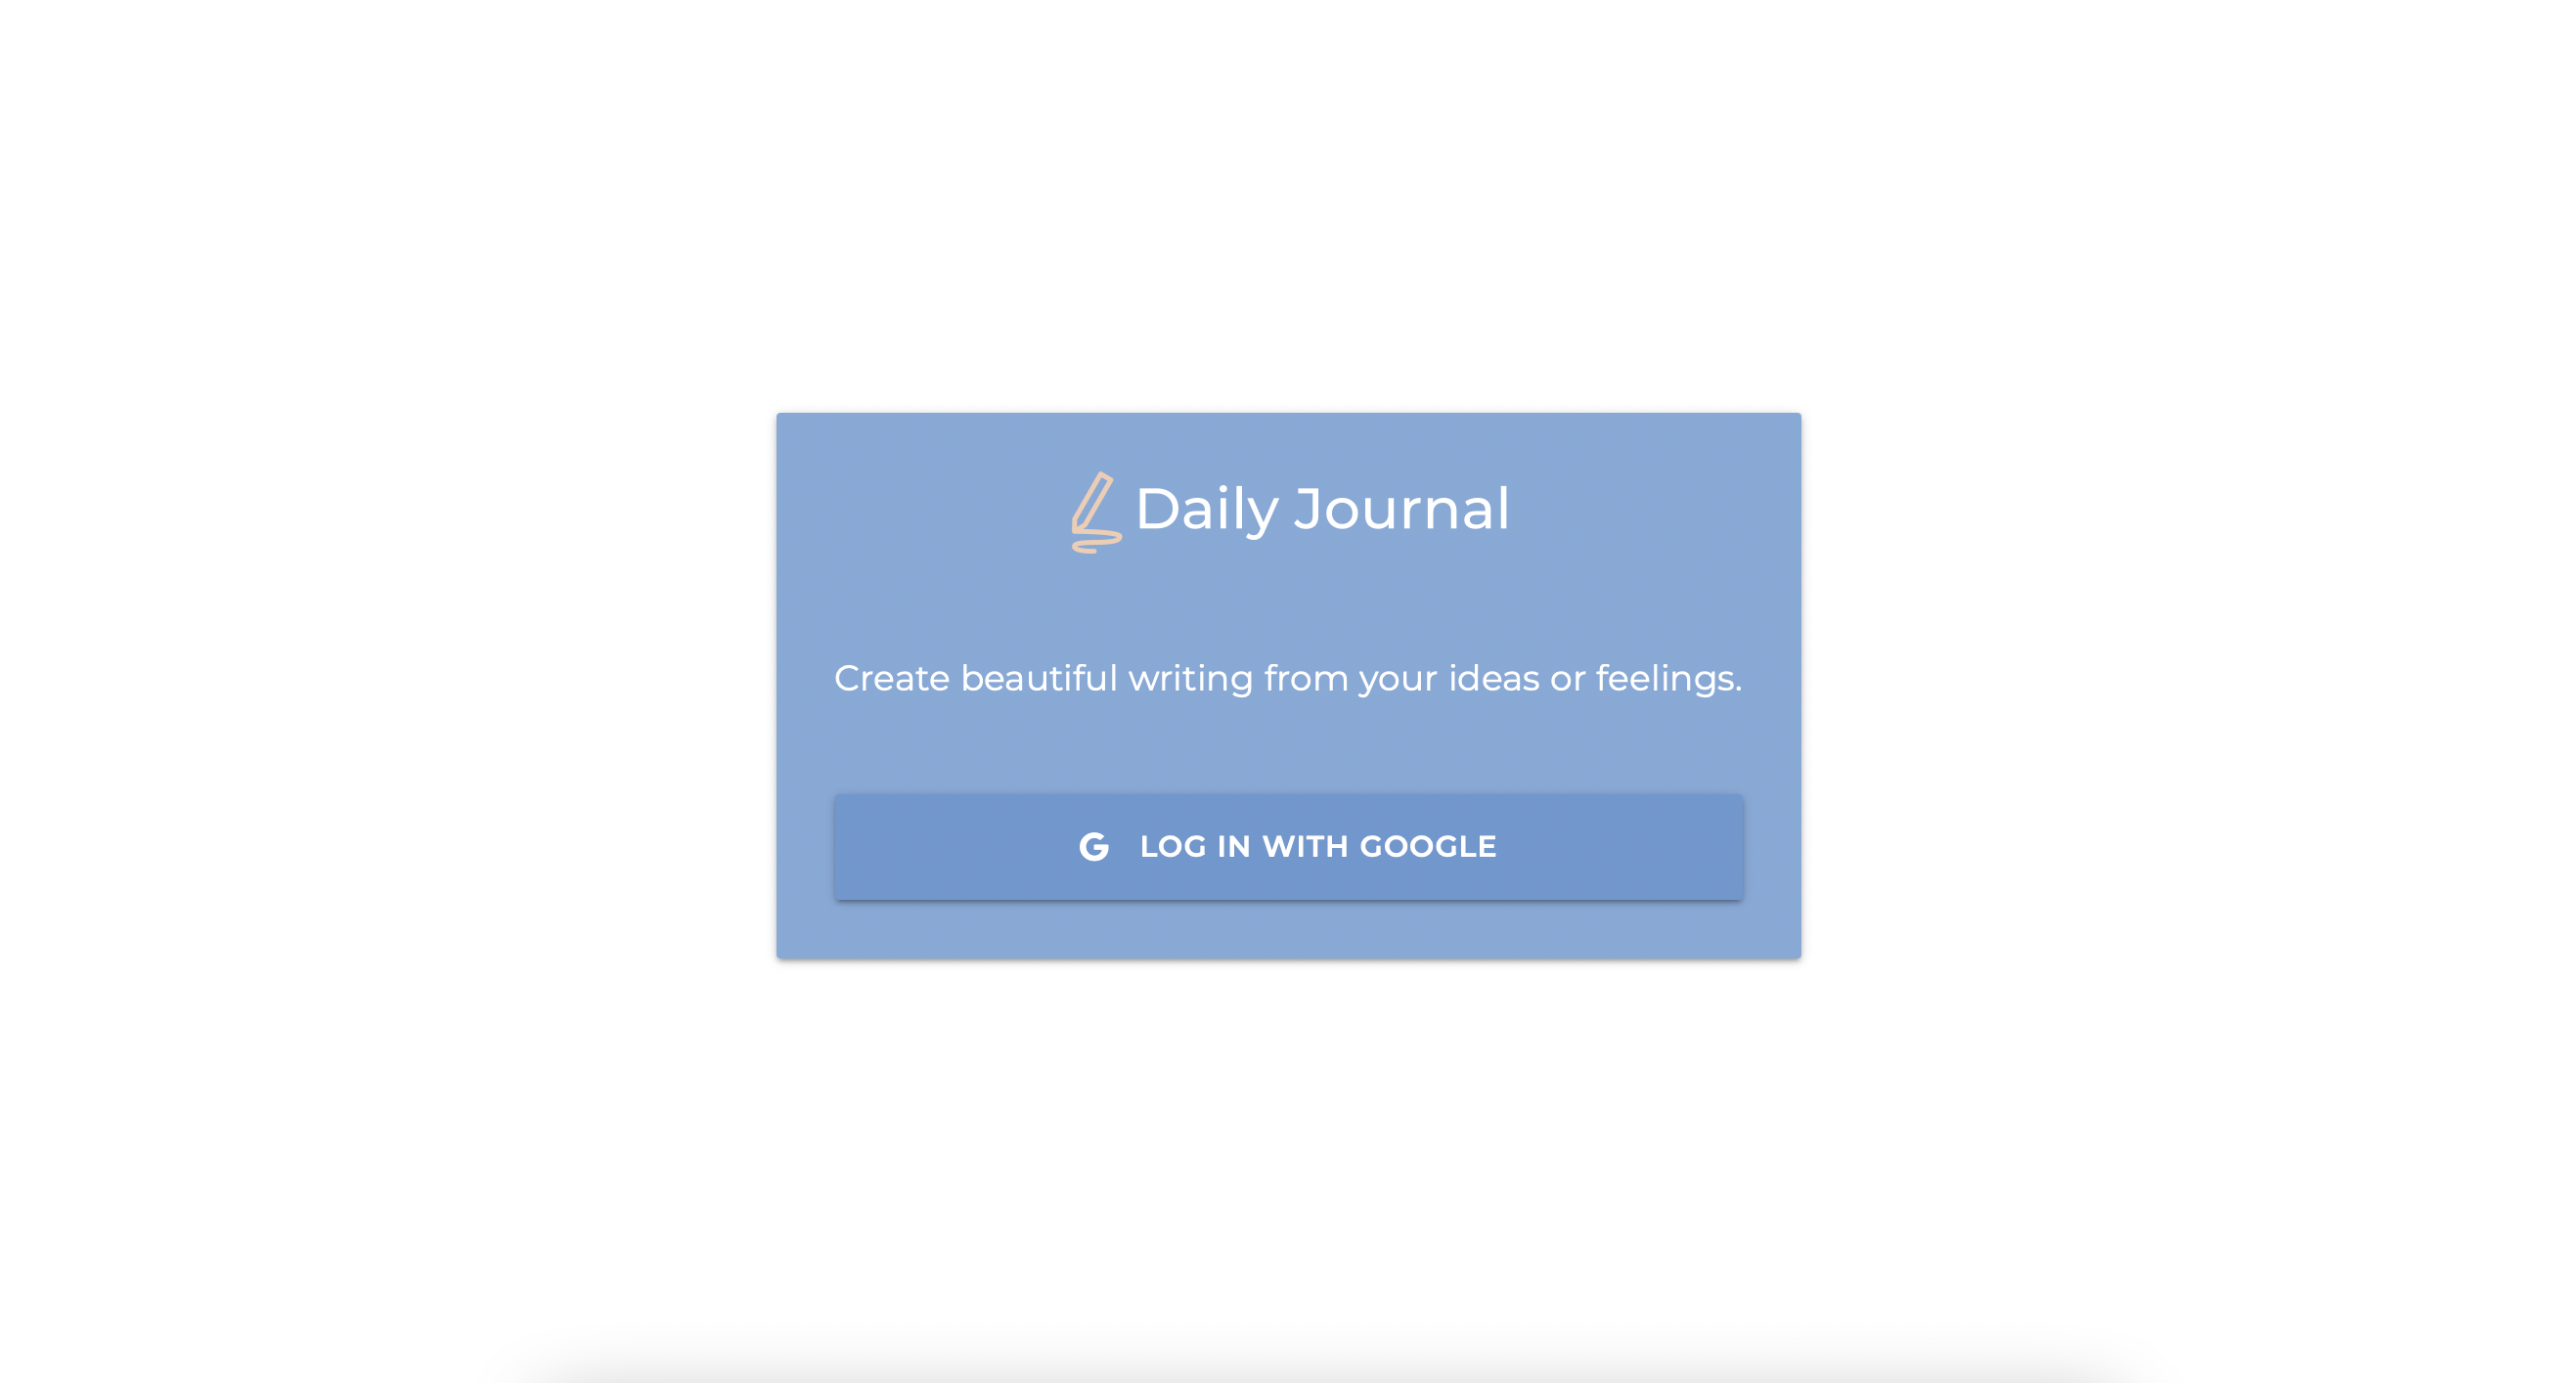 Daily Journals login page